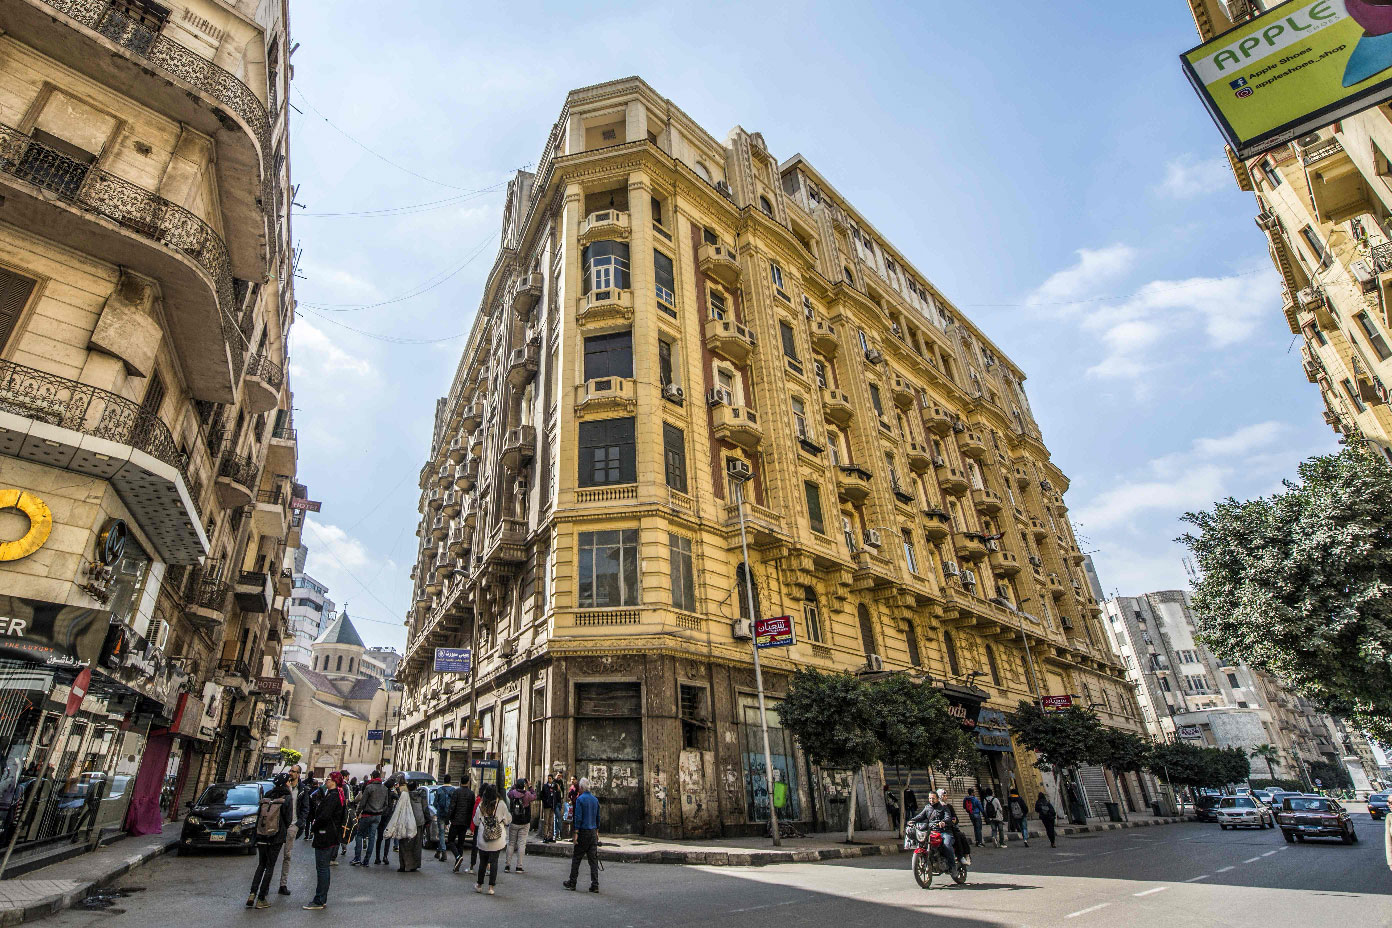 Picture taken on March 8, 2019 shows the Baehler building, dating to 1929, in the Egyptian capital Cairo's downtown district.